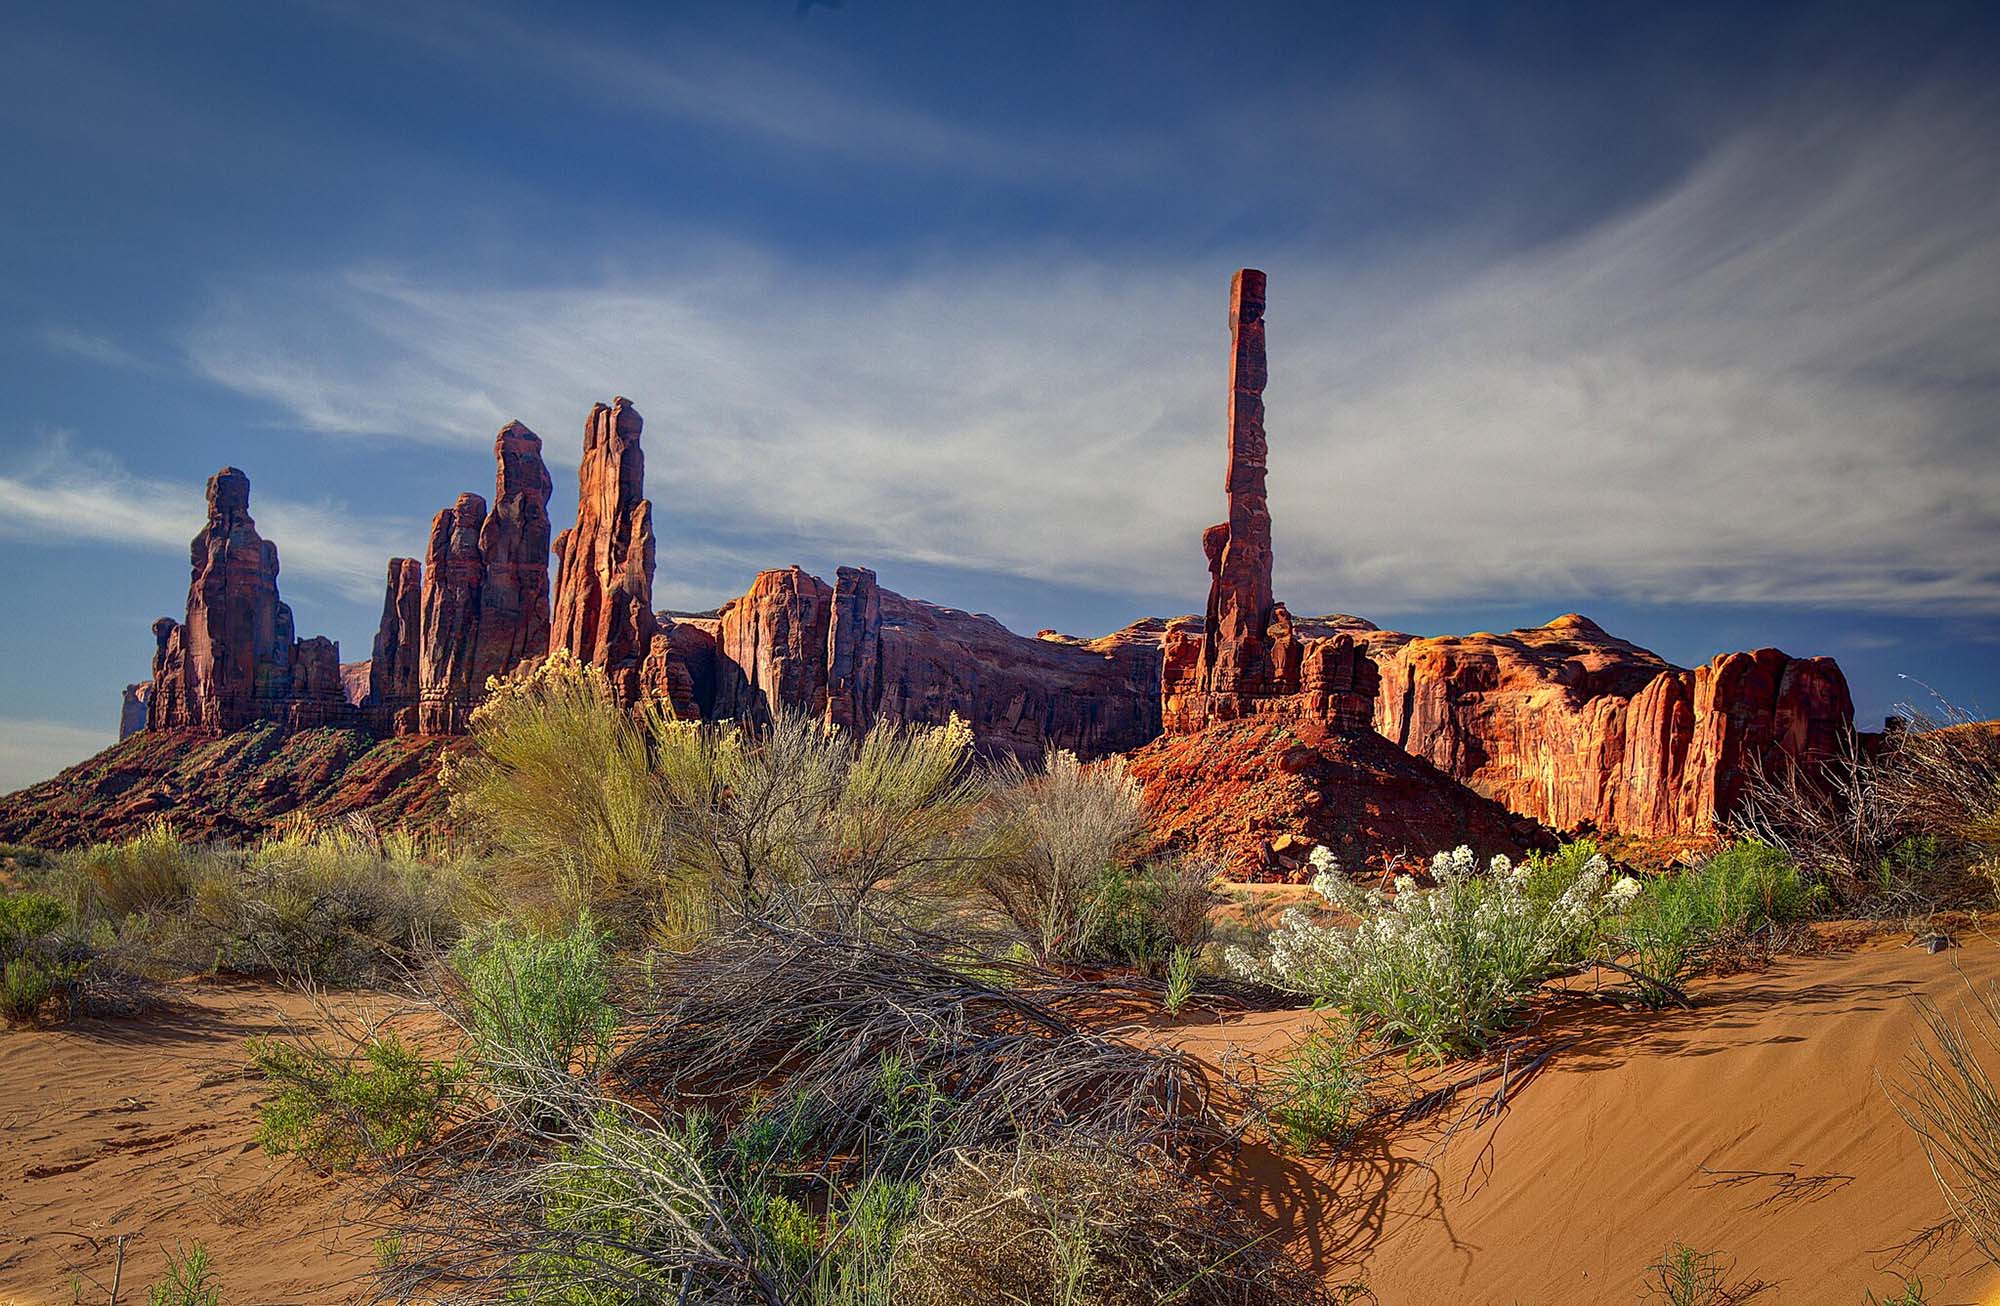 8 photos that show off the most beautiful spots in Monument Valley